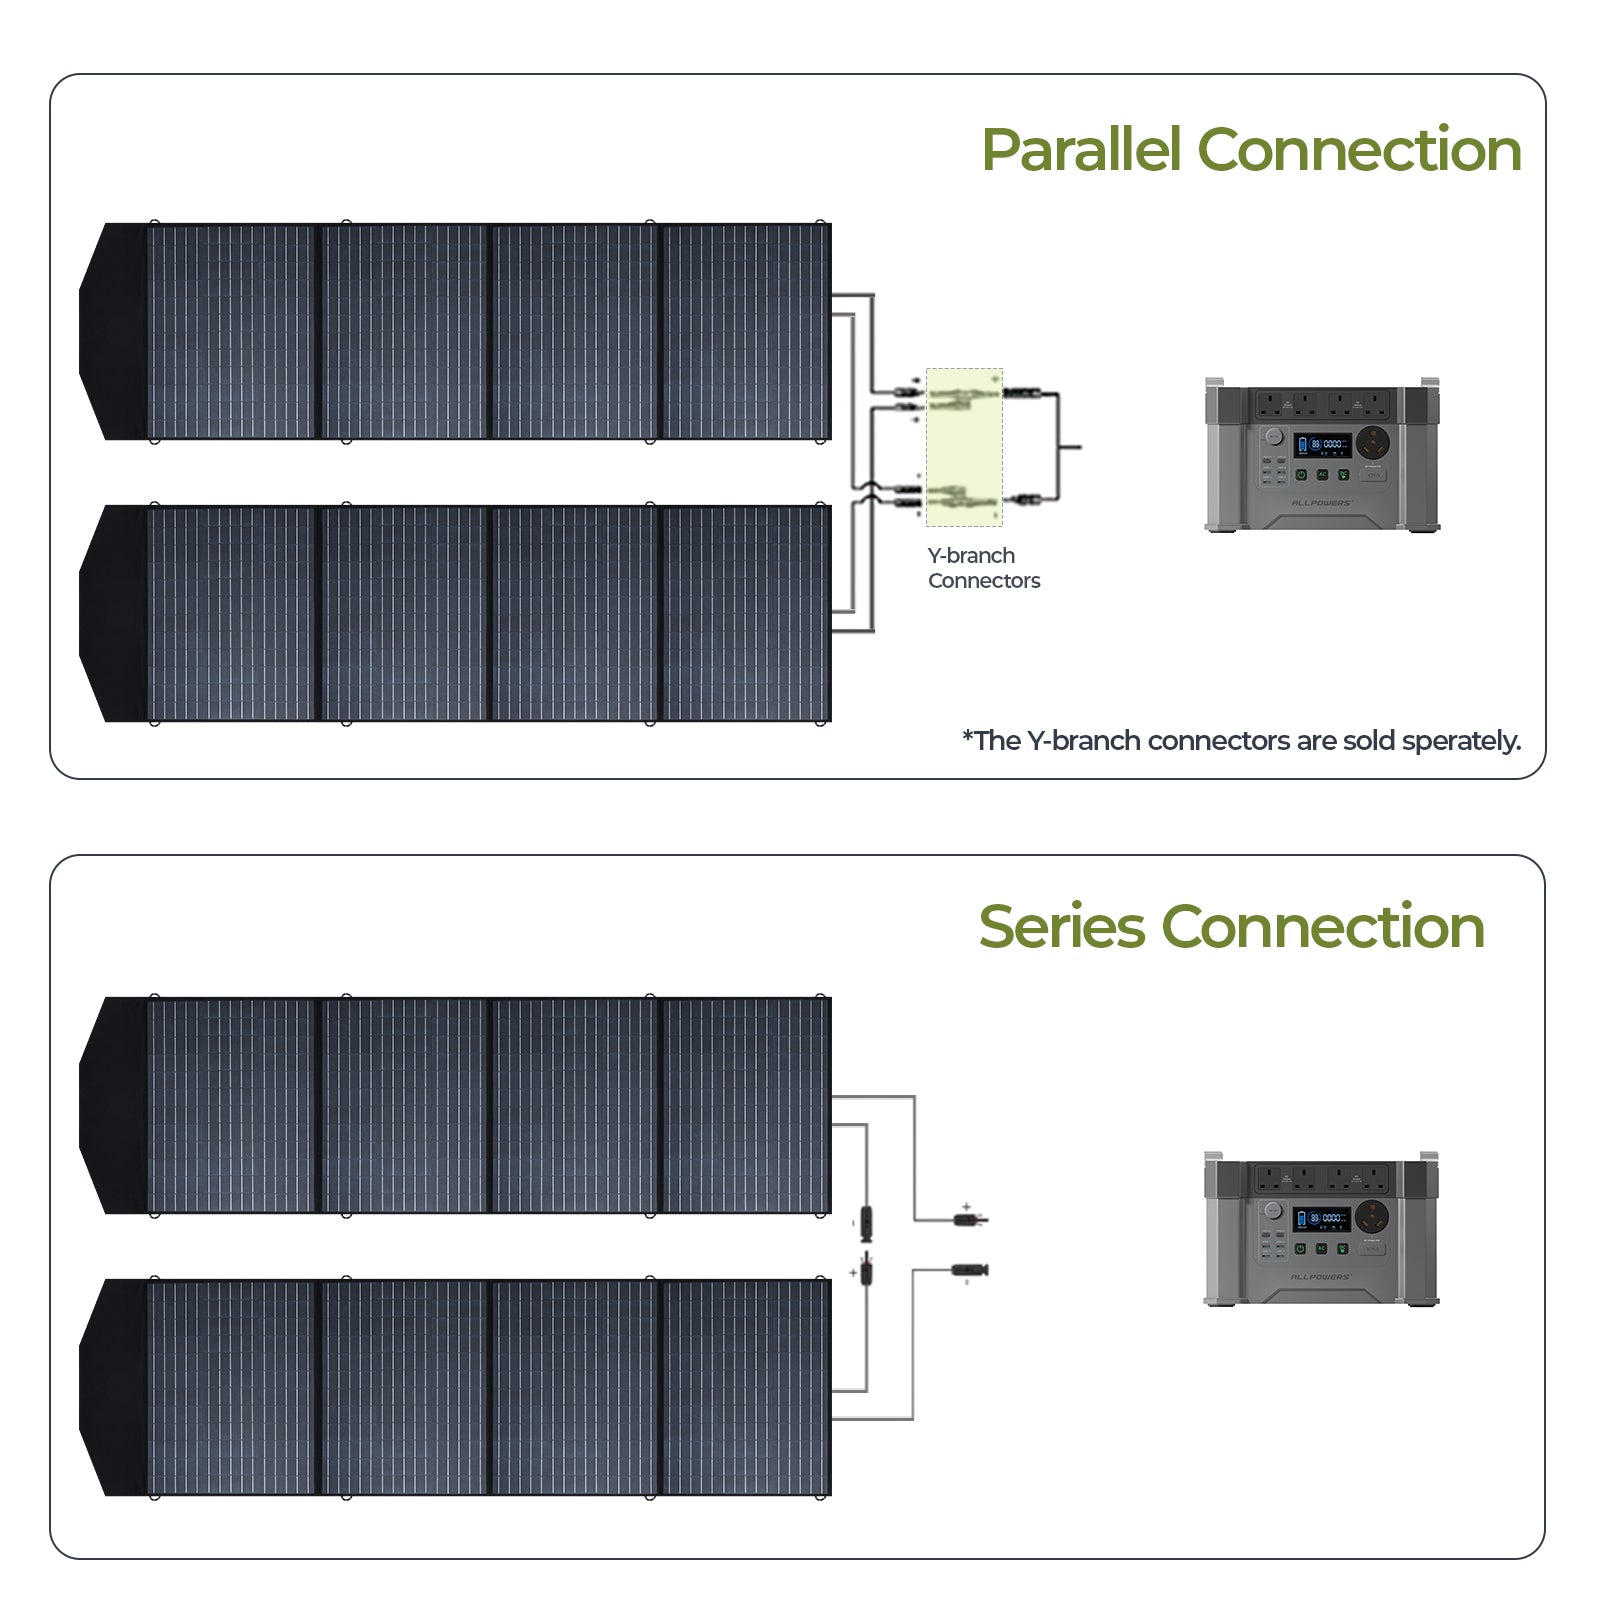 SP033-200W-foldable-solar-panel-parallel-connection-1600.jpg